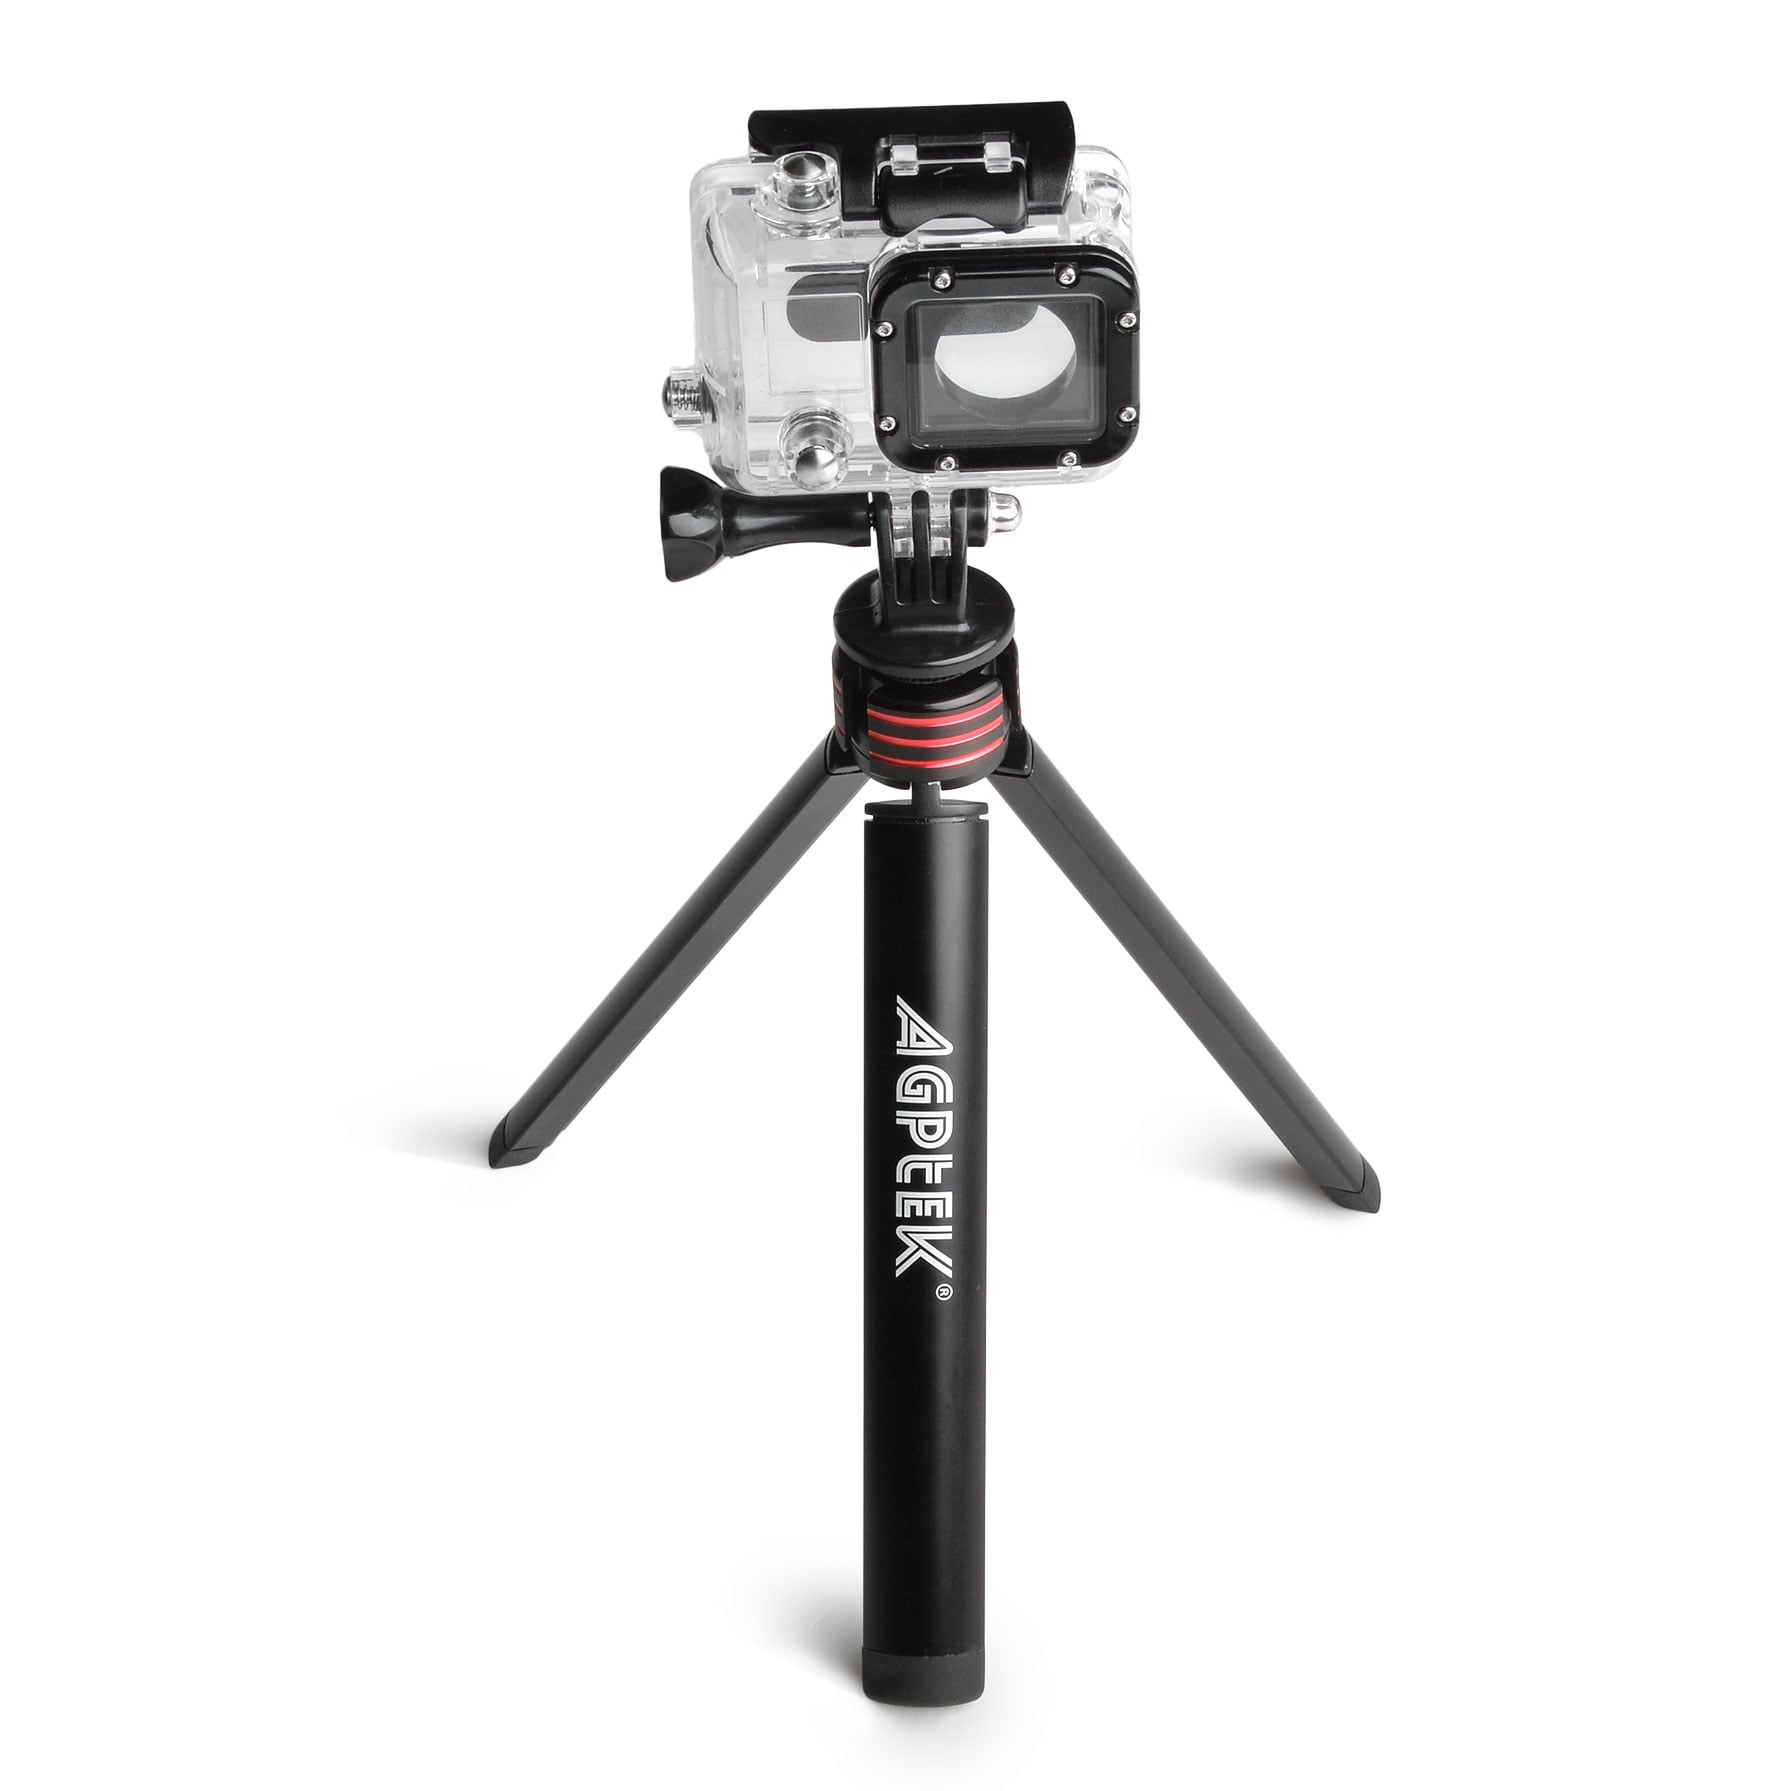 6 2 5 1 HD 4 Aluminum Alloy Metal GoPro Tripod/Monopod Mount with Aluminum Thumbscrew for GoPro Session Hero 7 3 Black 3+